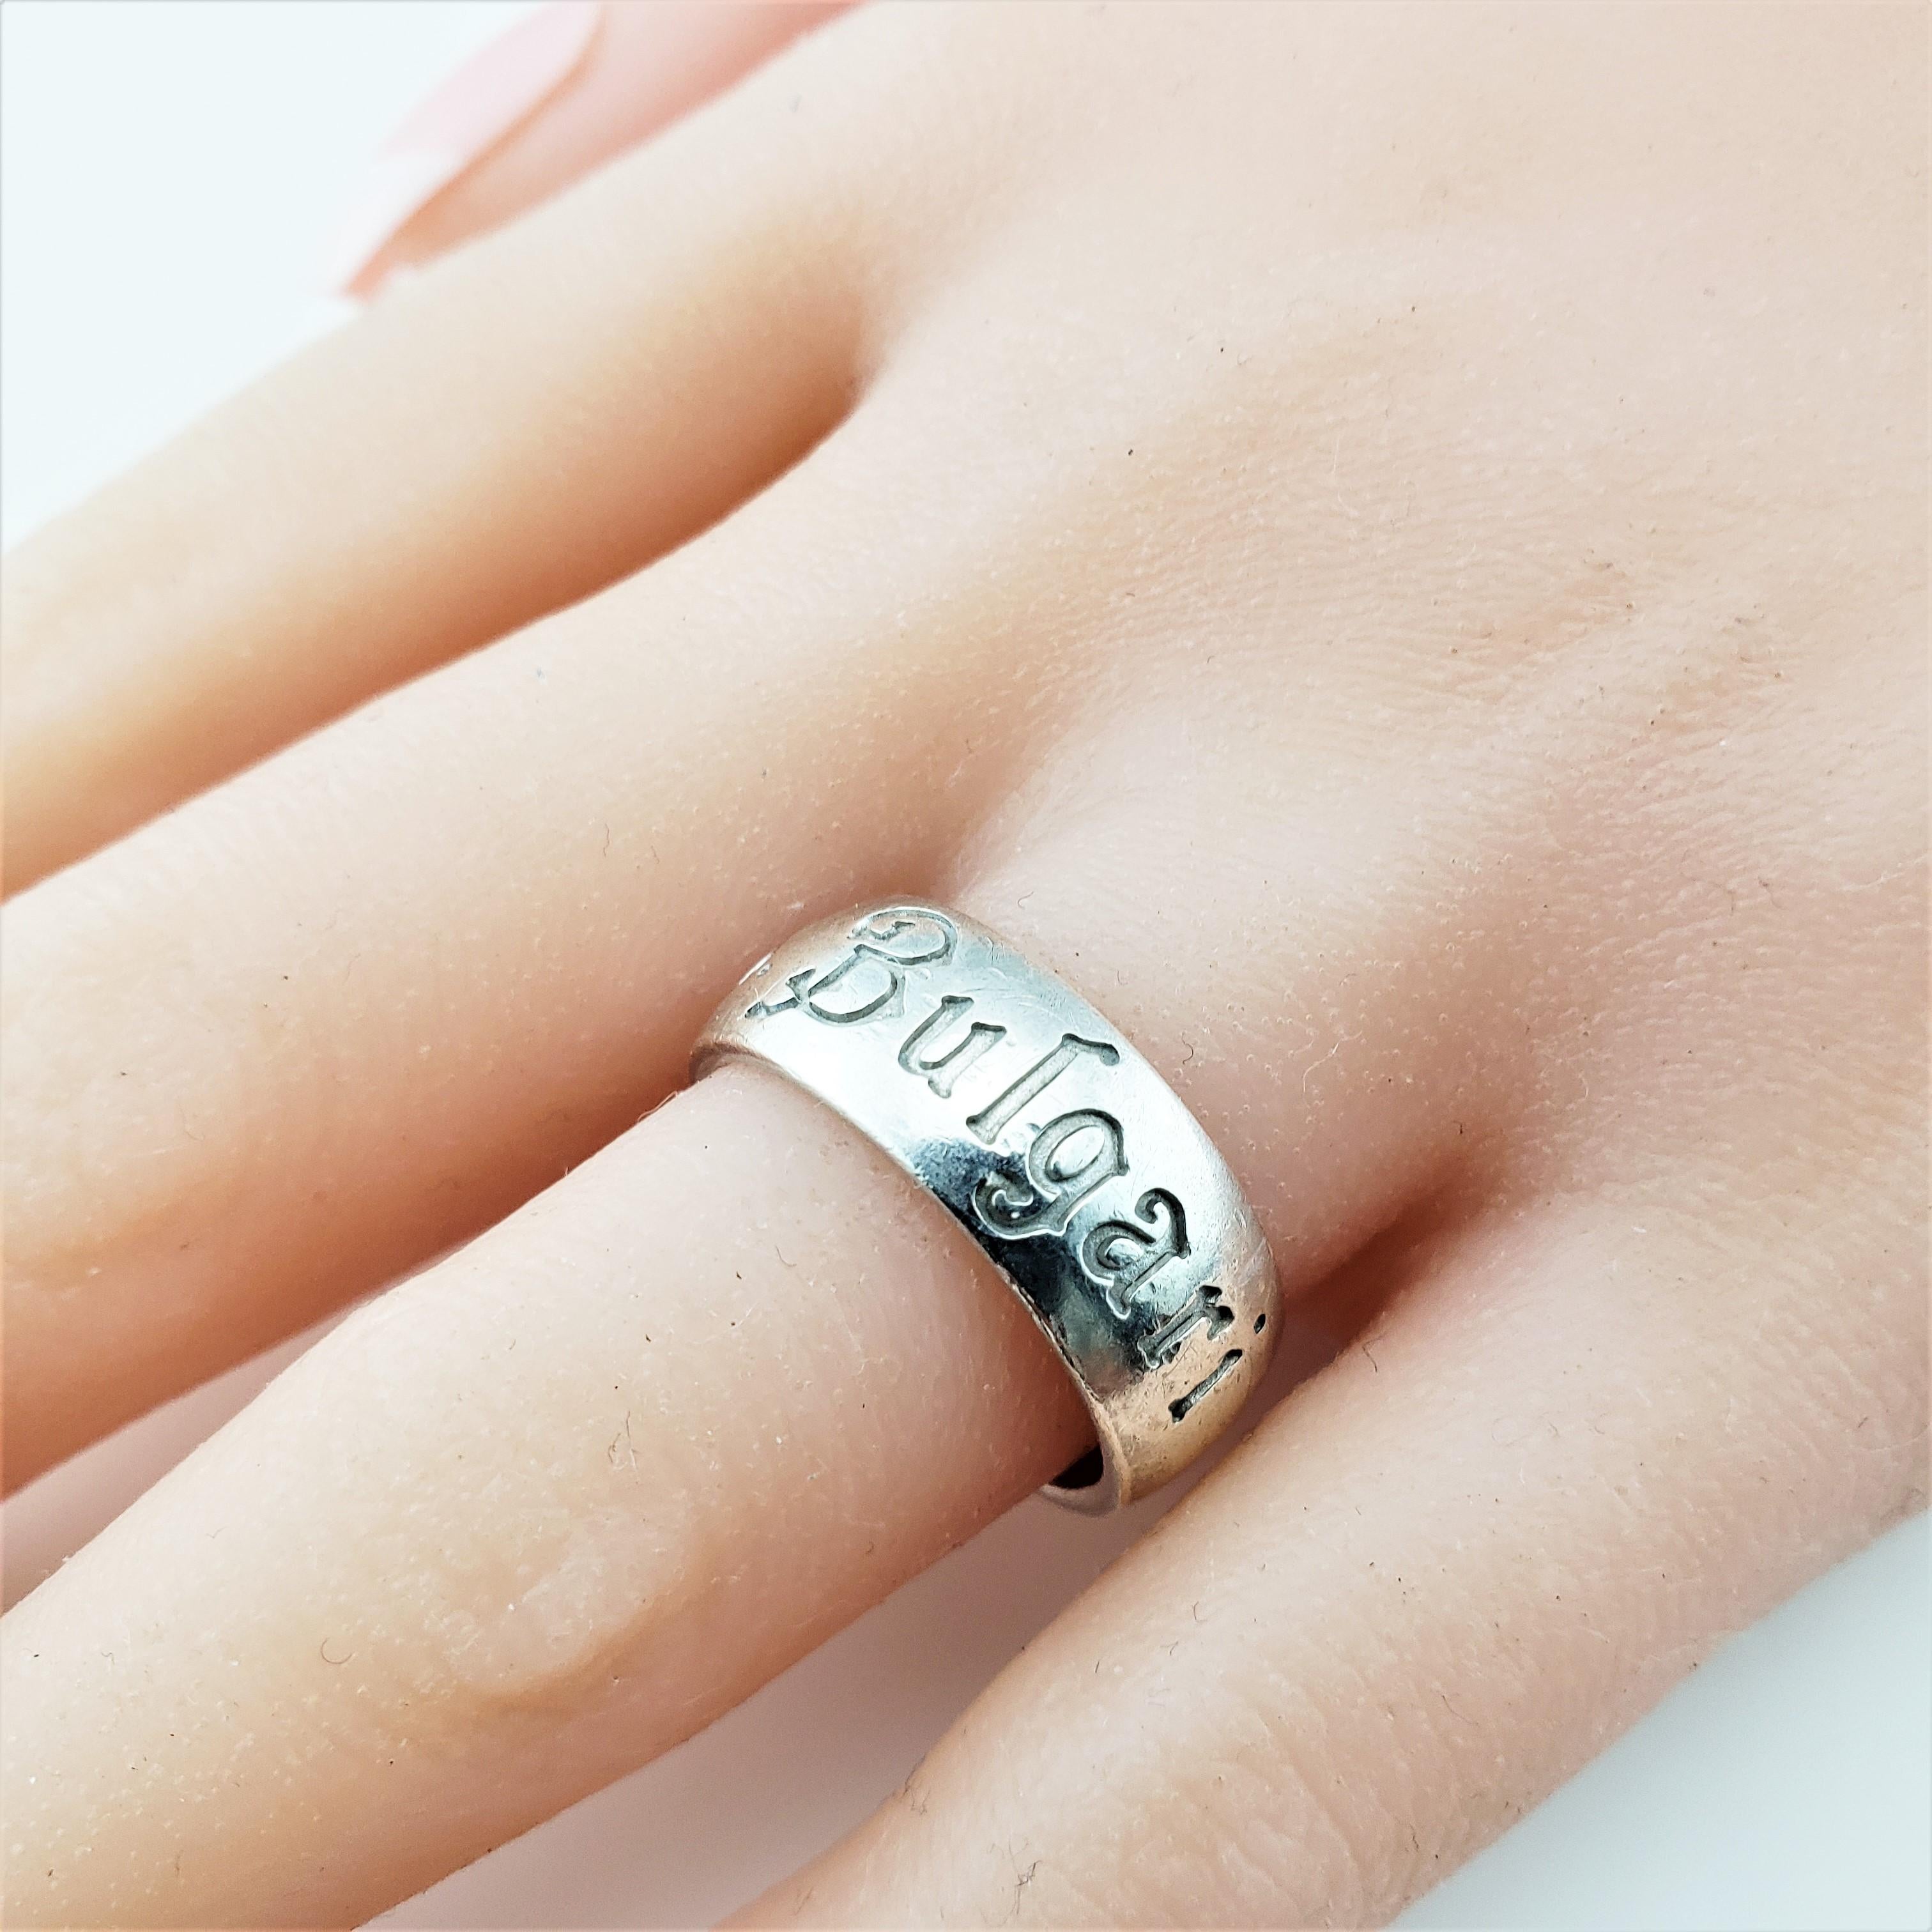 Bvlgari Sterling Silver Save the Children Ring 2